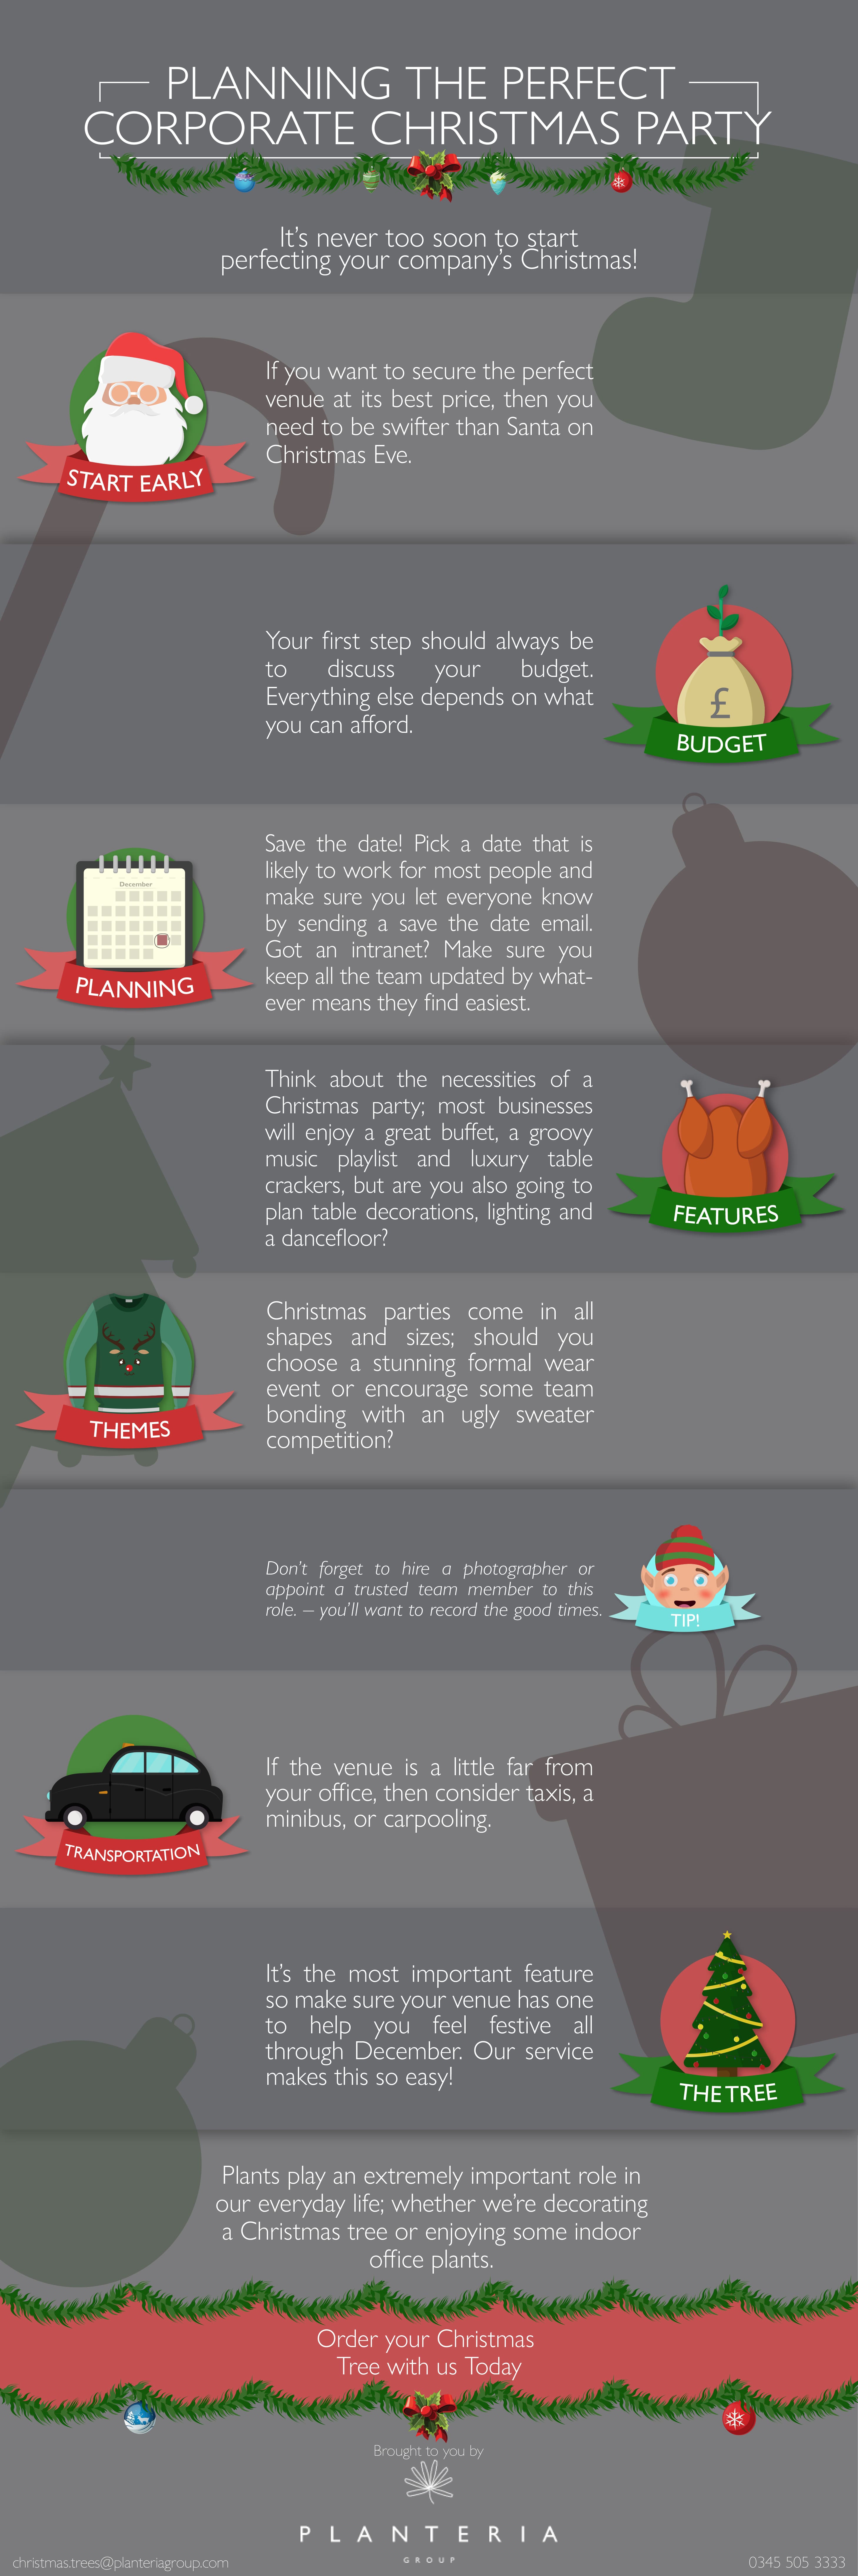 Corporate Christmas Party Infographic